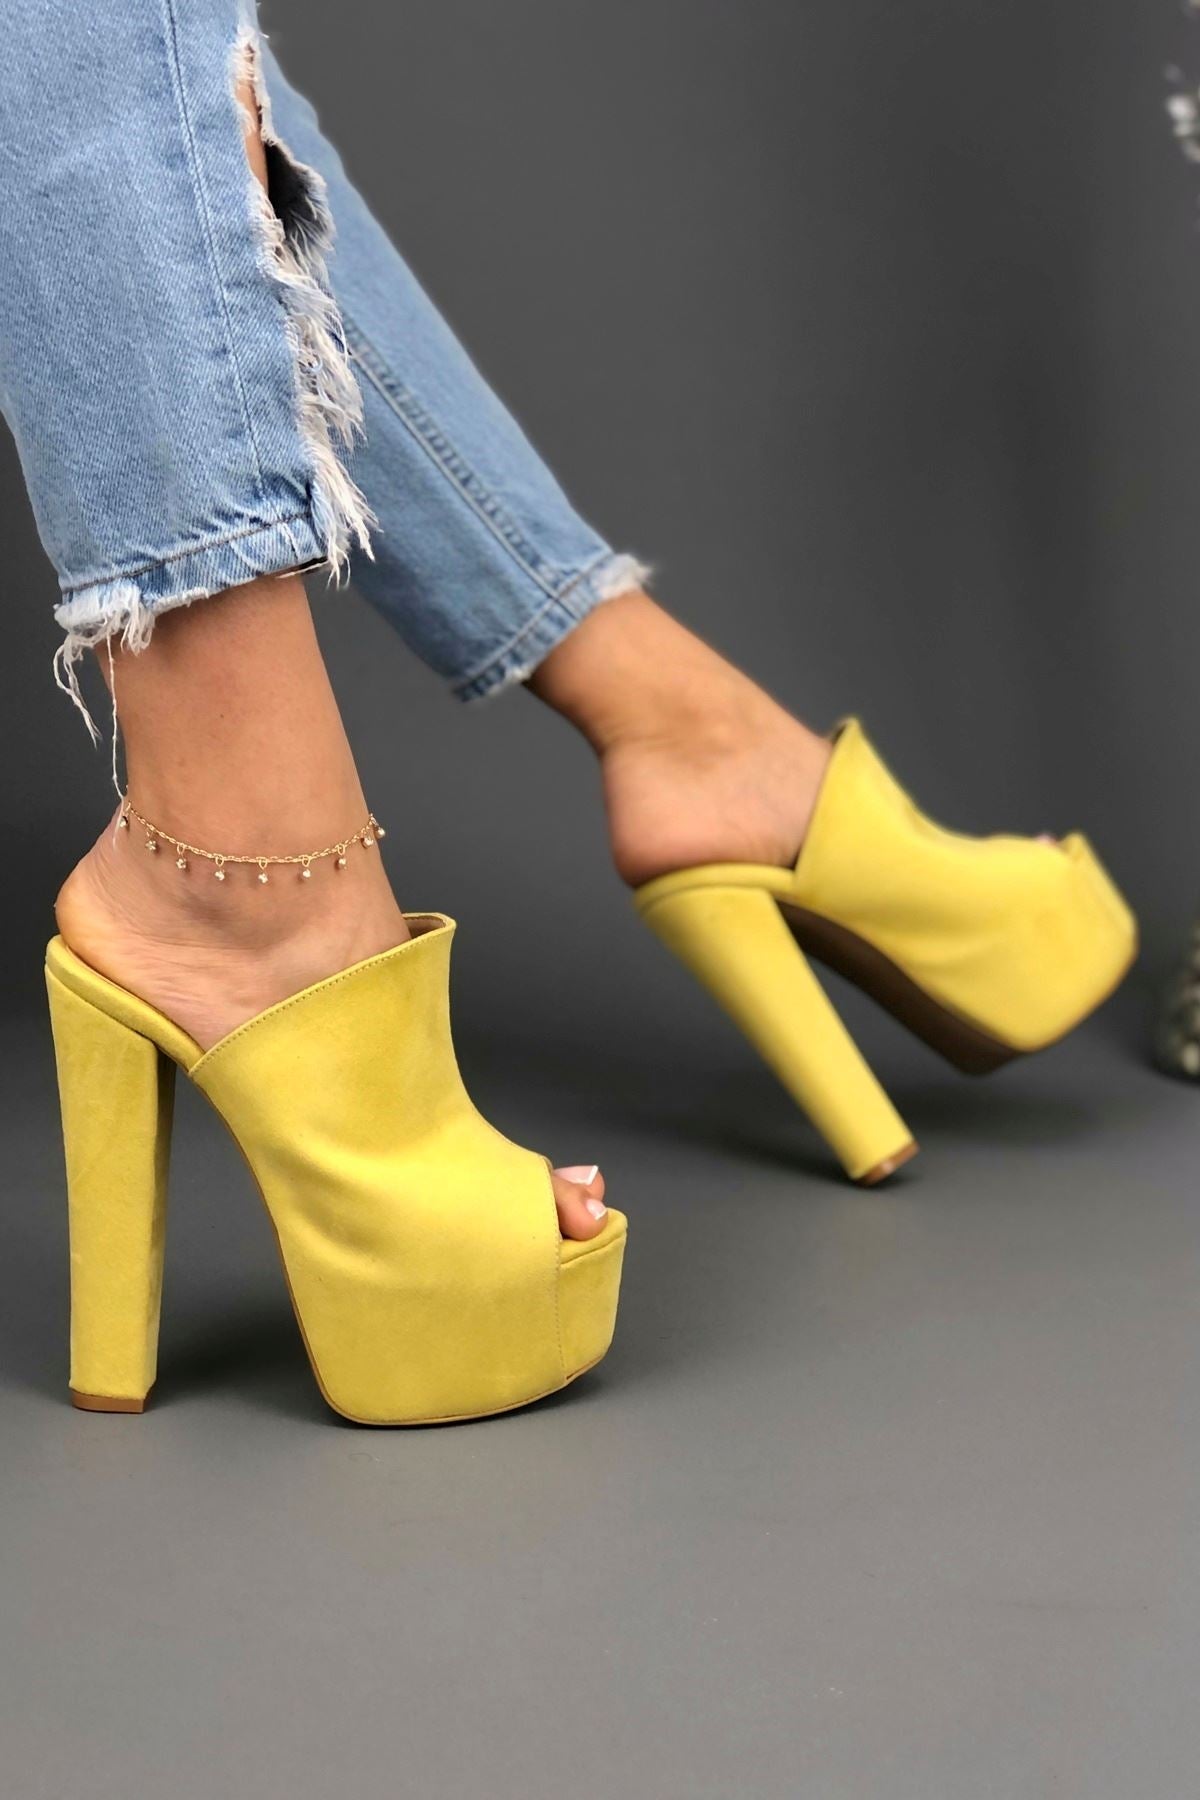 Image of Women's Yellow Suede Heeled Slippers